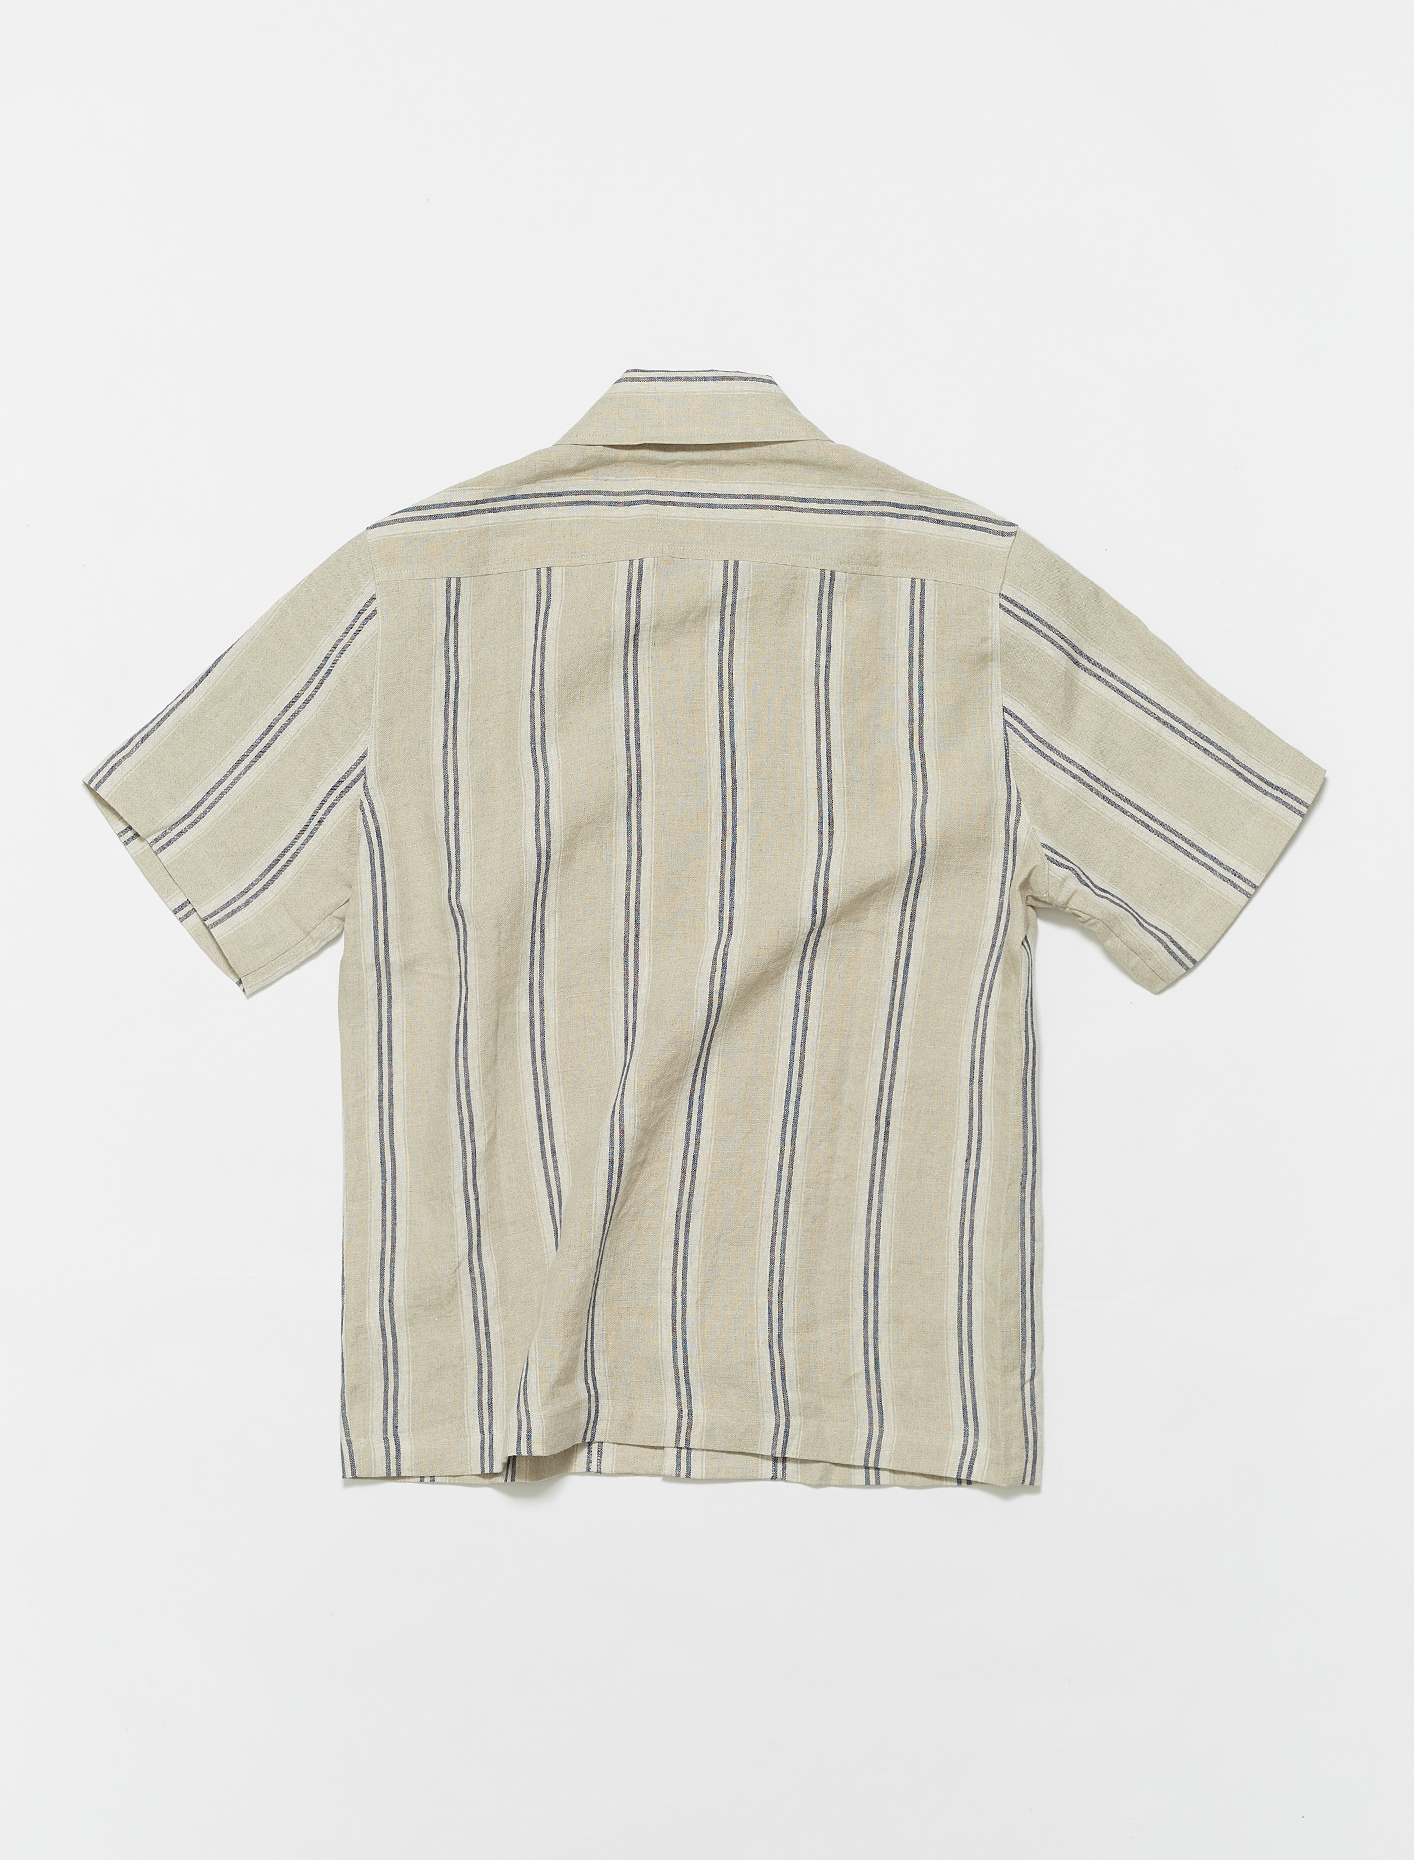 ANOTHER ASPECT ANOTHER Shirt 2.0 in Blue Stripe | Voo Store Berlin